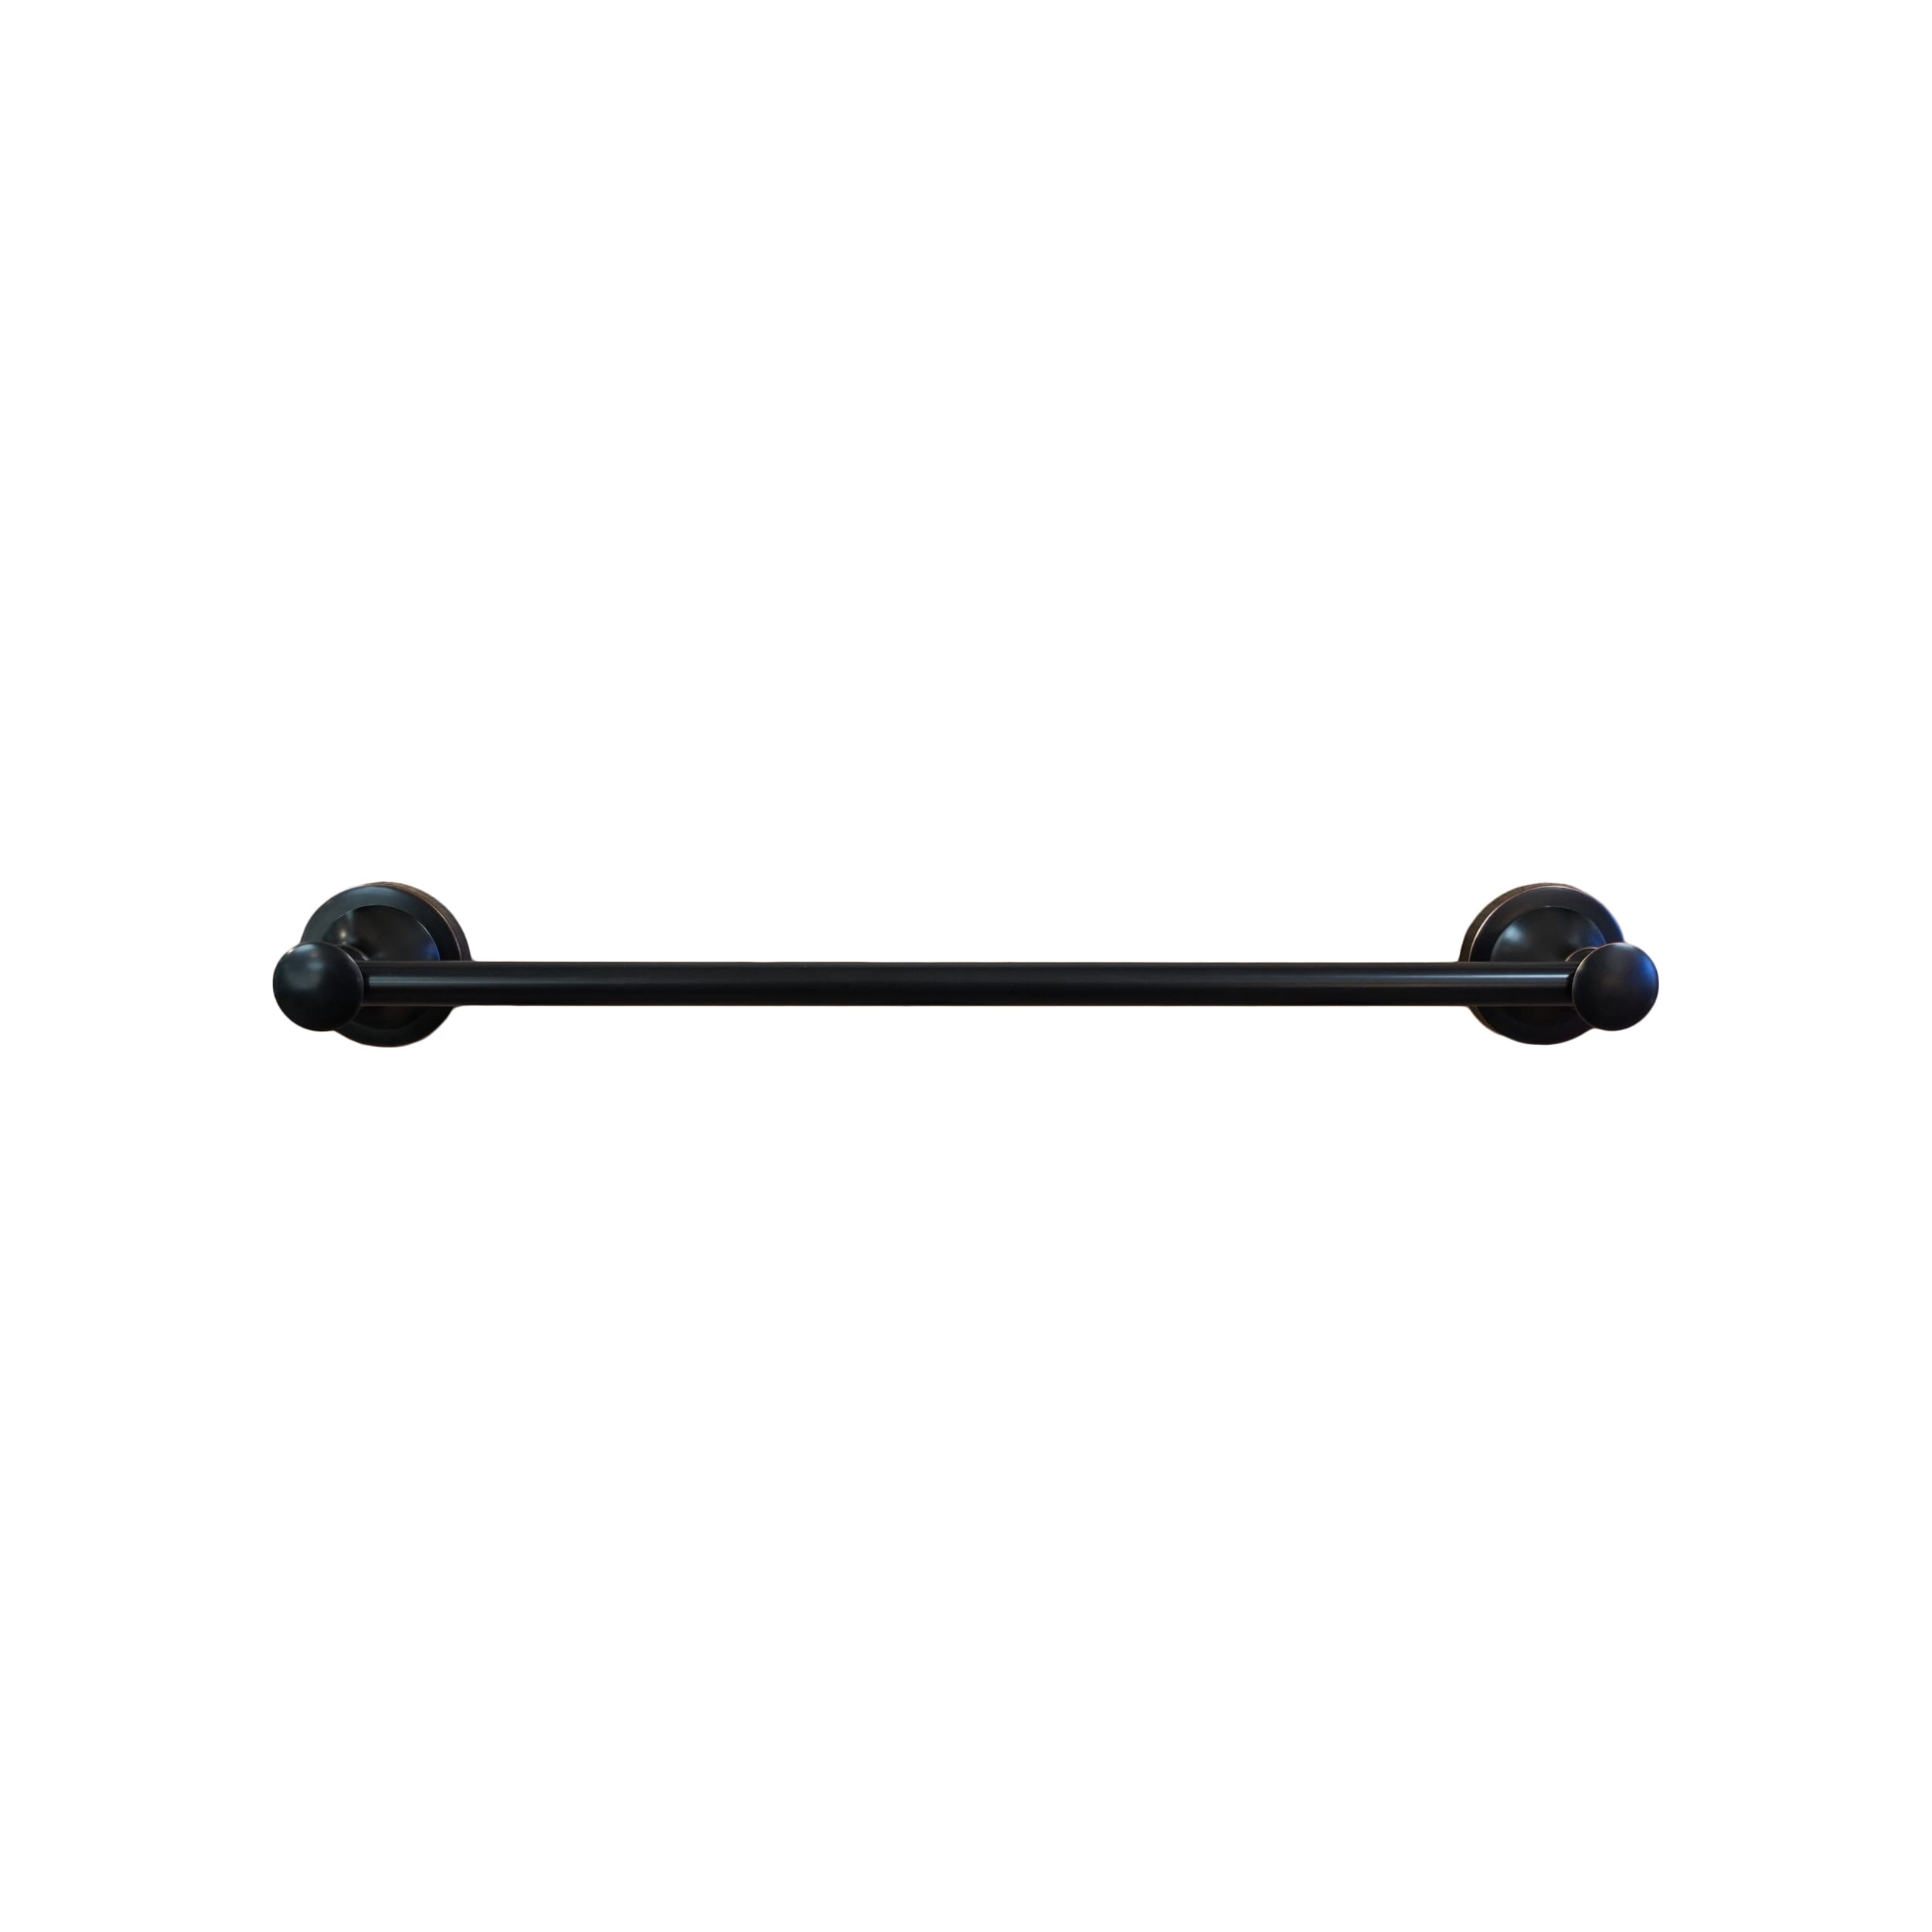 London 18-in Oil-Rubbed Bronze Wall Mount Single Towel Bar | - Dyconn Faucet BLNTB18-ORB